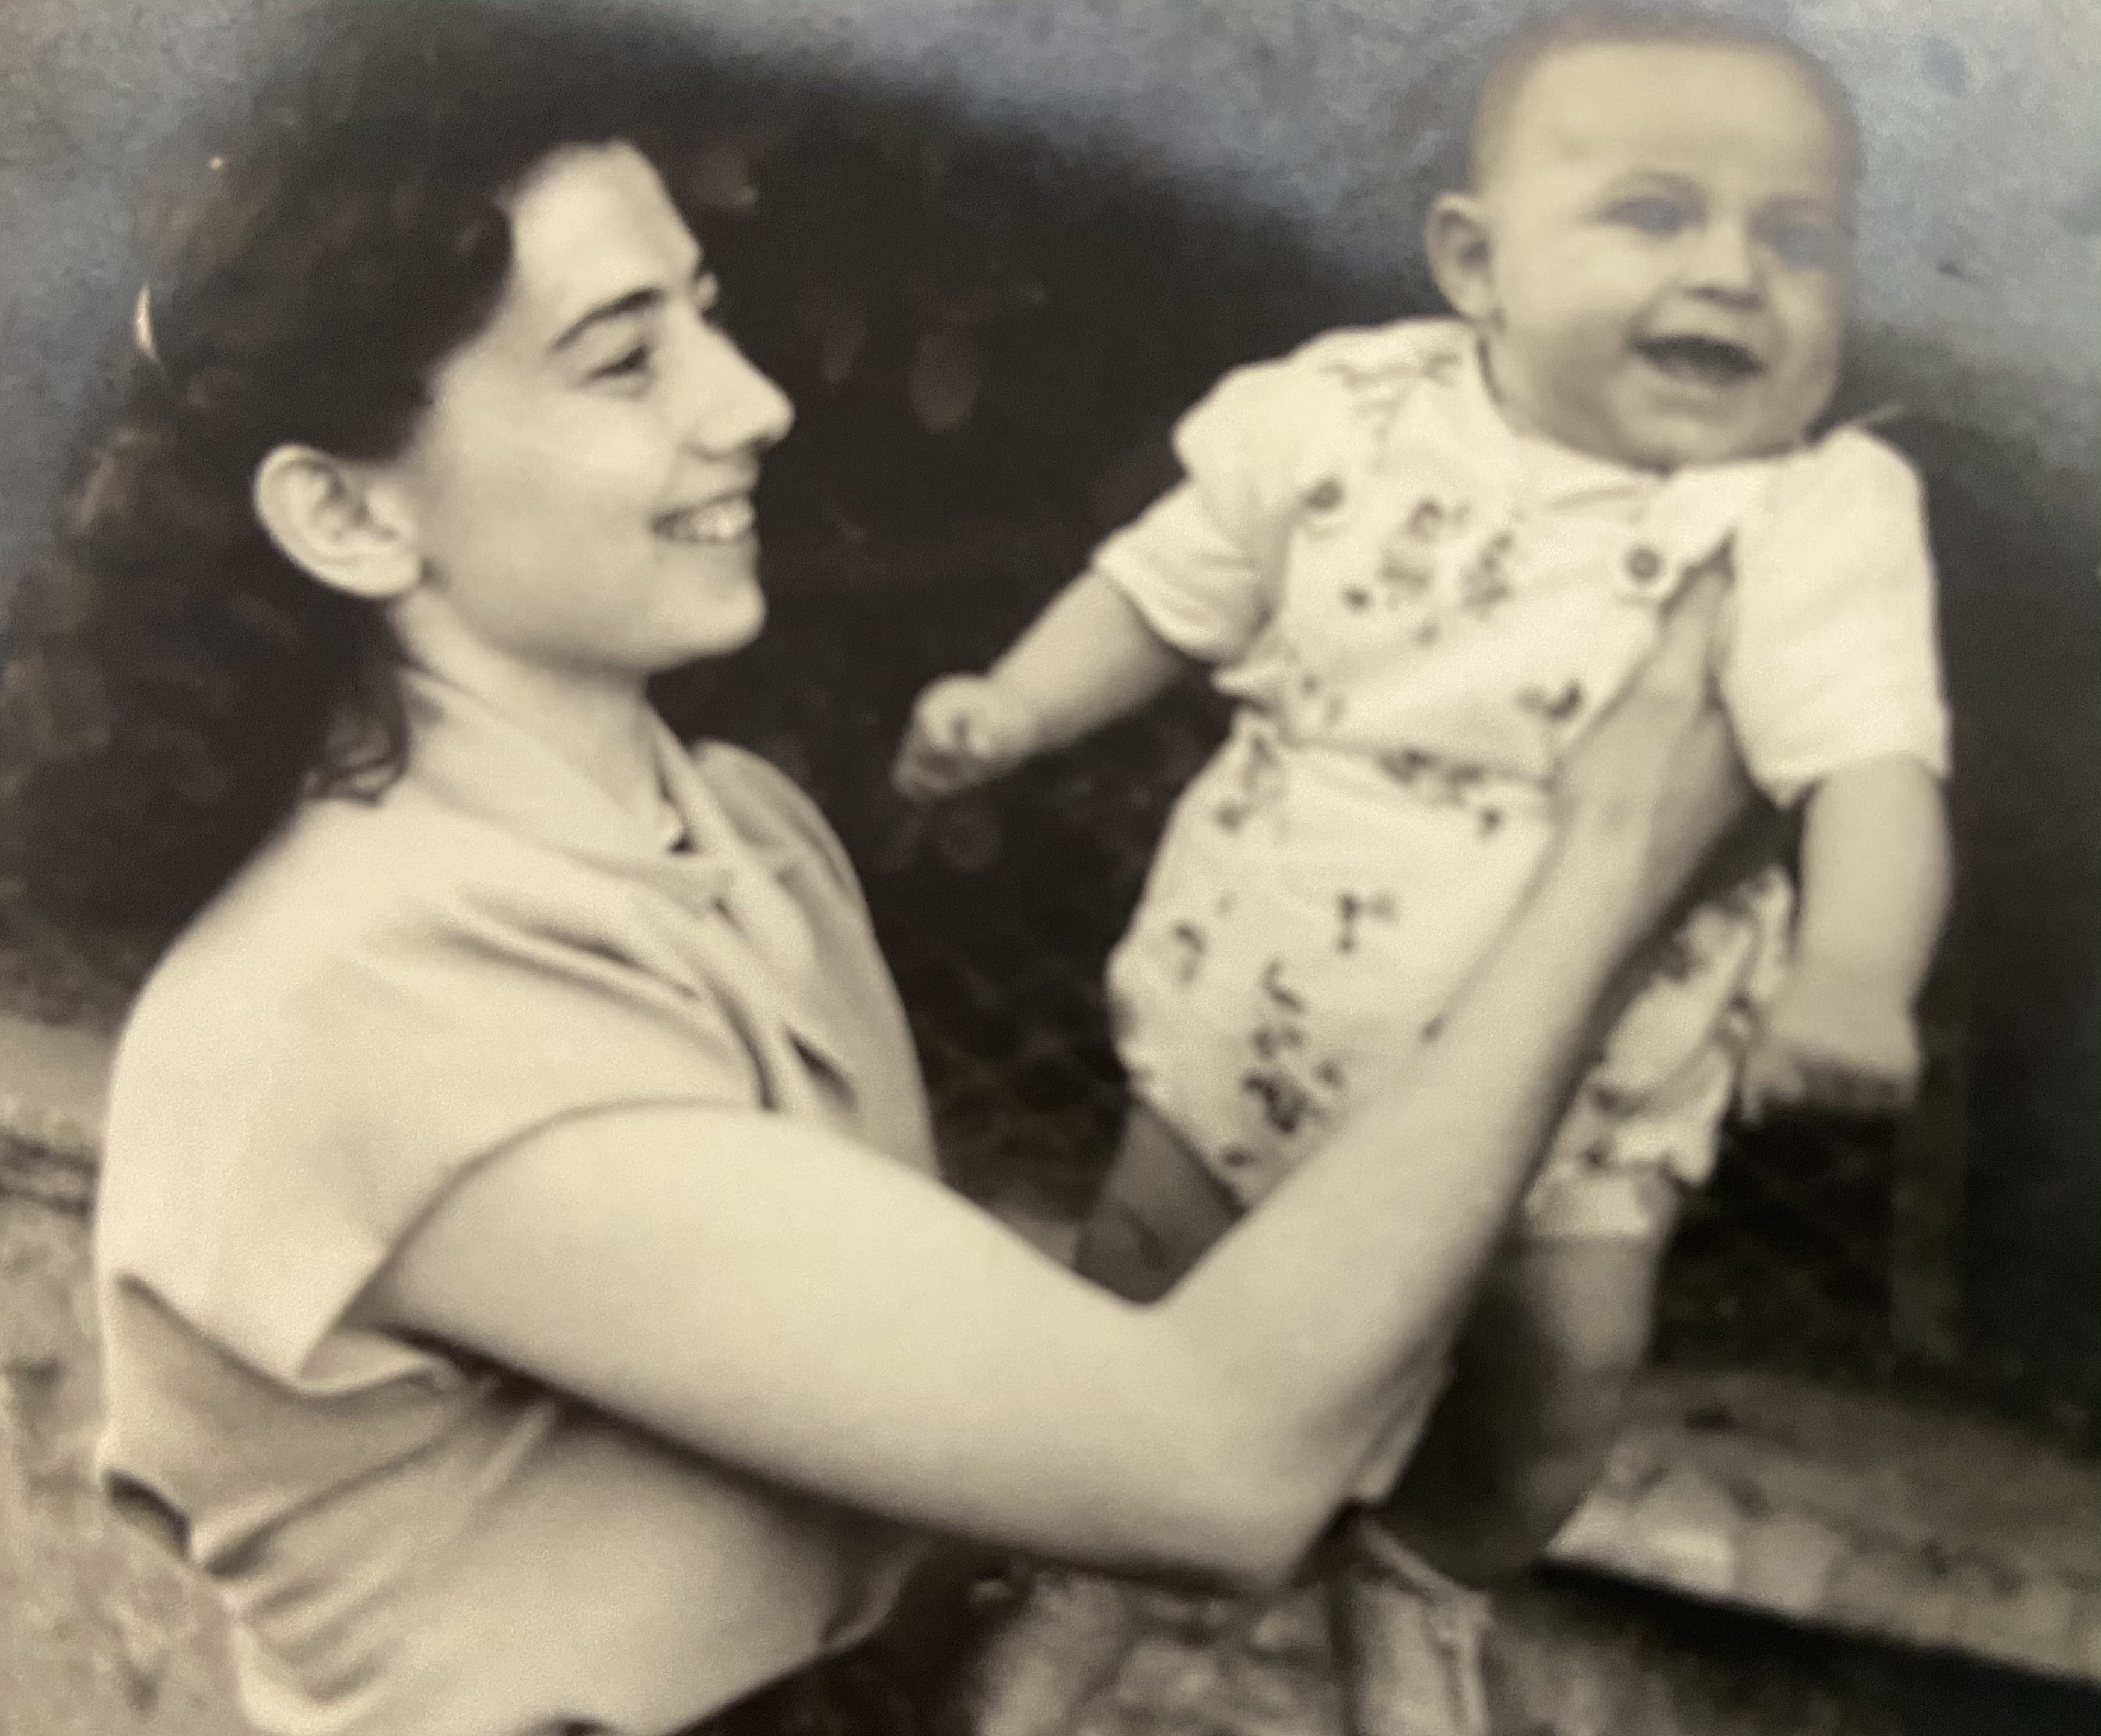 Esther Kahn with her young son Shimon during the preparations for immigration to Eretz Israel with the kibbutz movement, 1947.